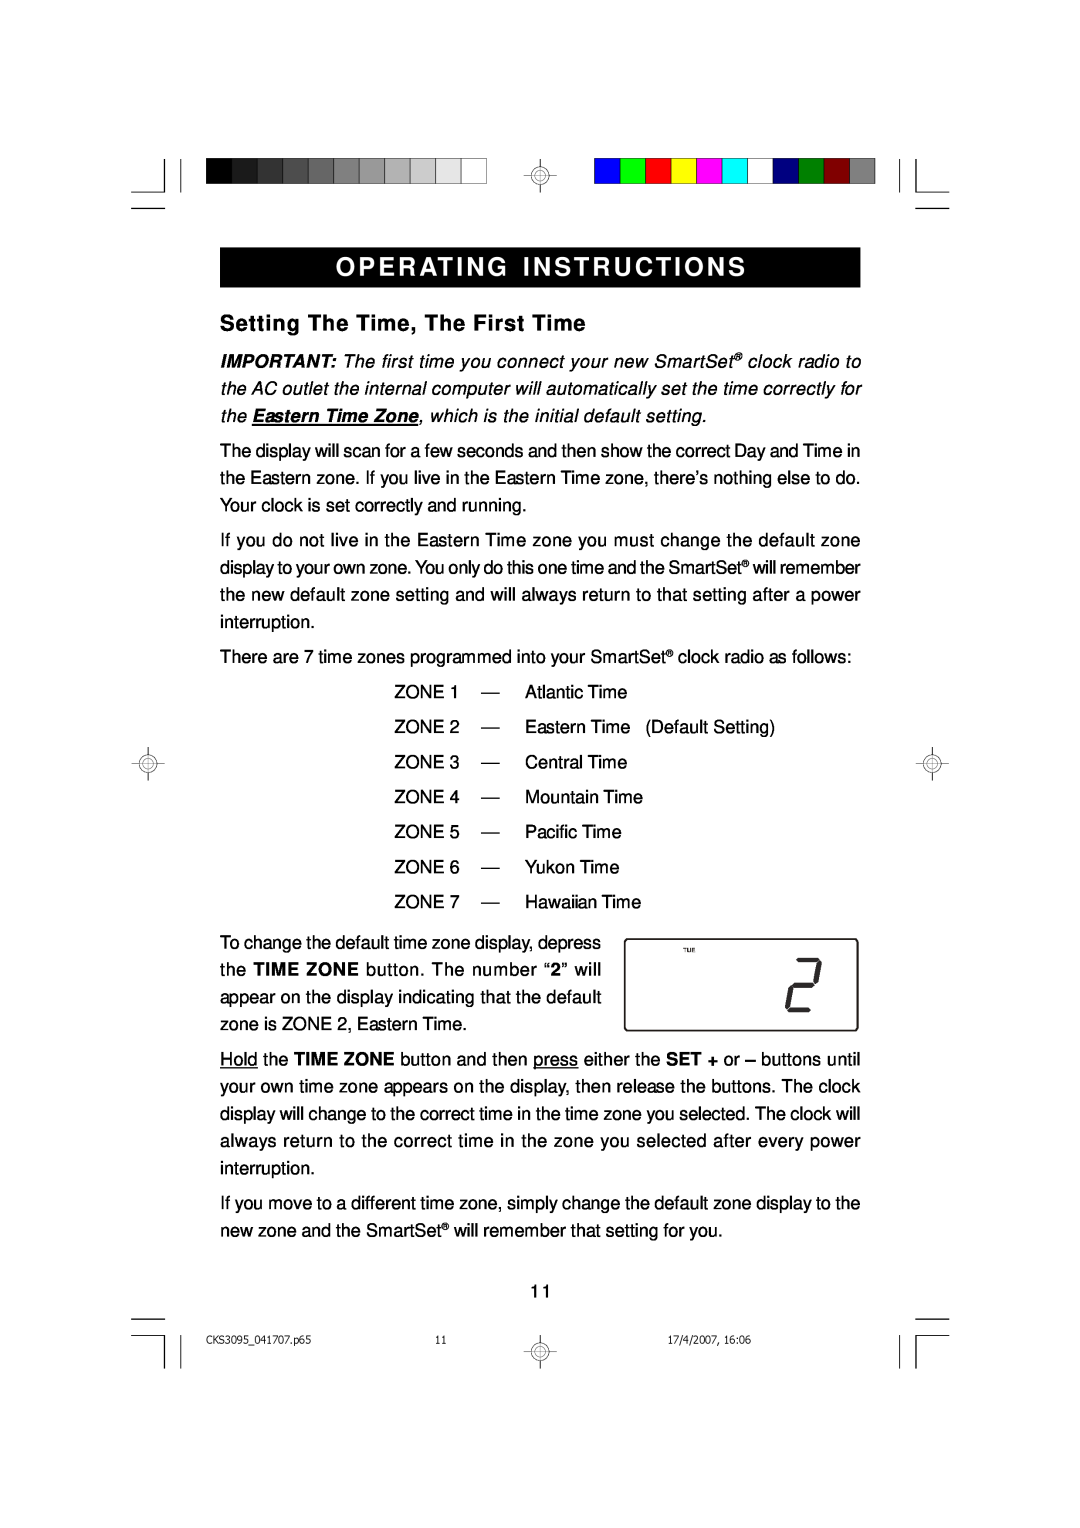 Emerson CKS3095S, CKS3095B owner manual Operating Instructions, Setting The Time, The First Time 